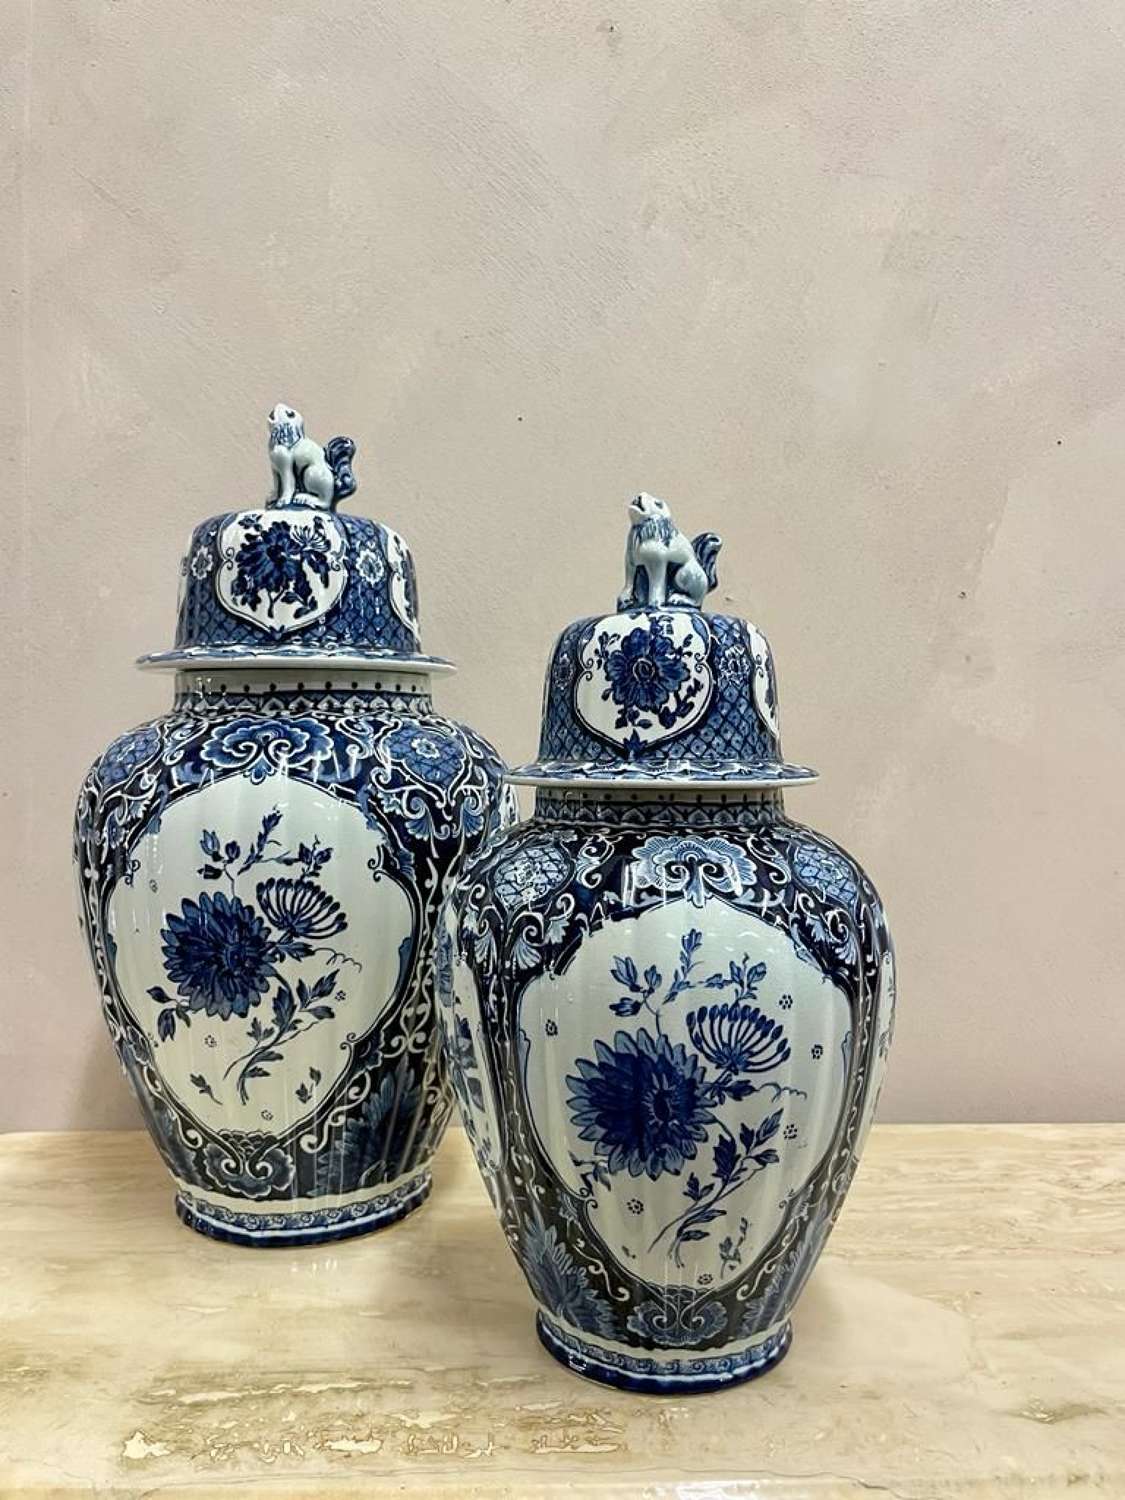 Medium and Large Delft Ginger Jars with Covers by Petrous Regout